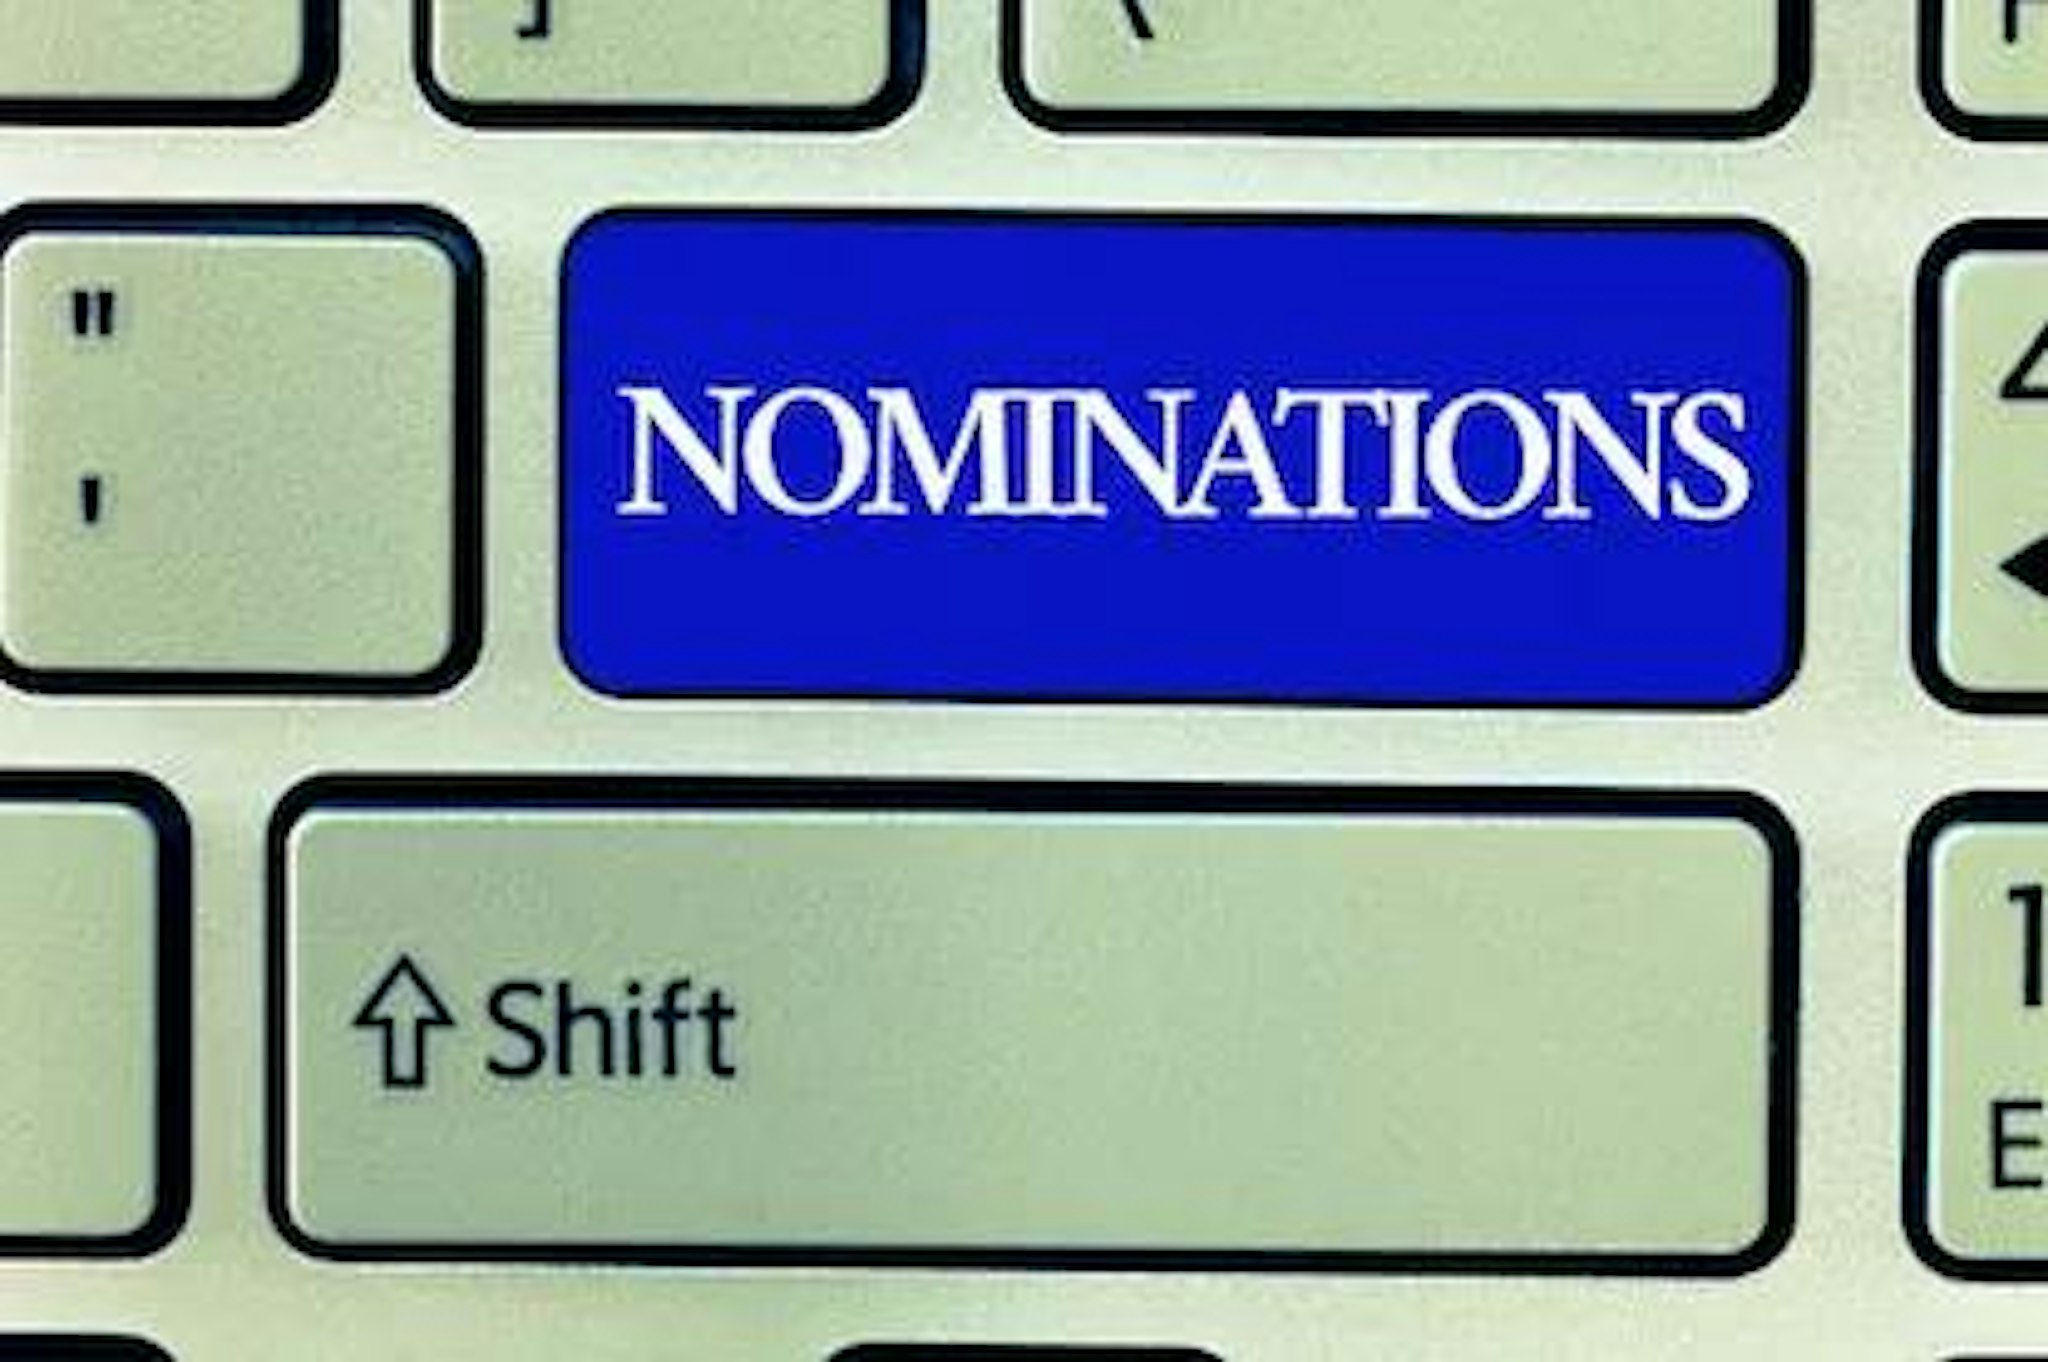 A 'nominations' button on a keyboard signifying a sample nominating committee charter.